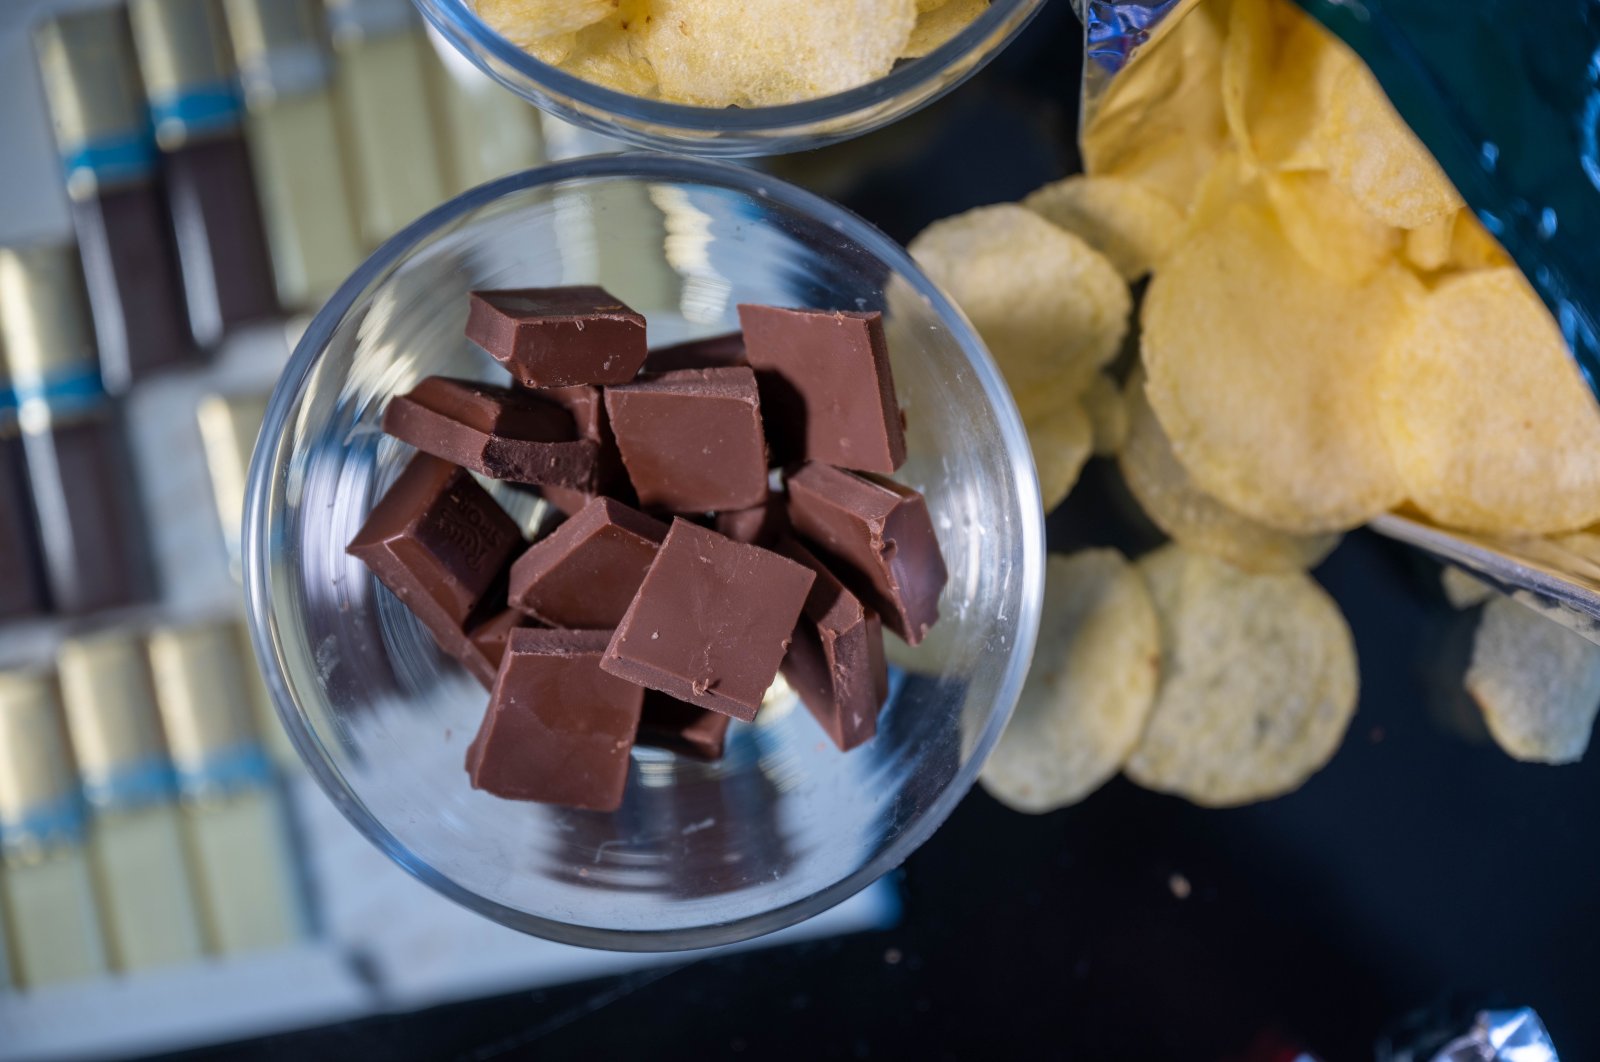 Snacks and sweets can cause cravings similar to those caused by alcohol and cigarettes, according to scientists in Brazil, Spain and the U.S. (dpa Photo)